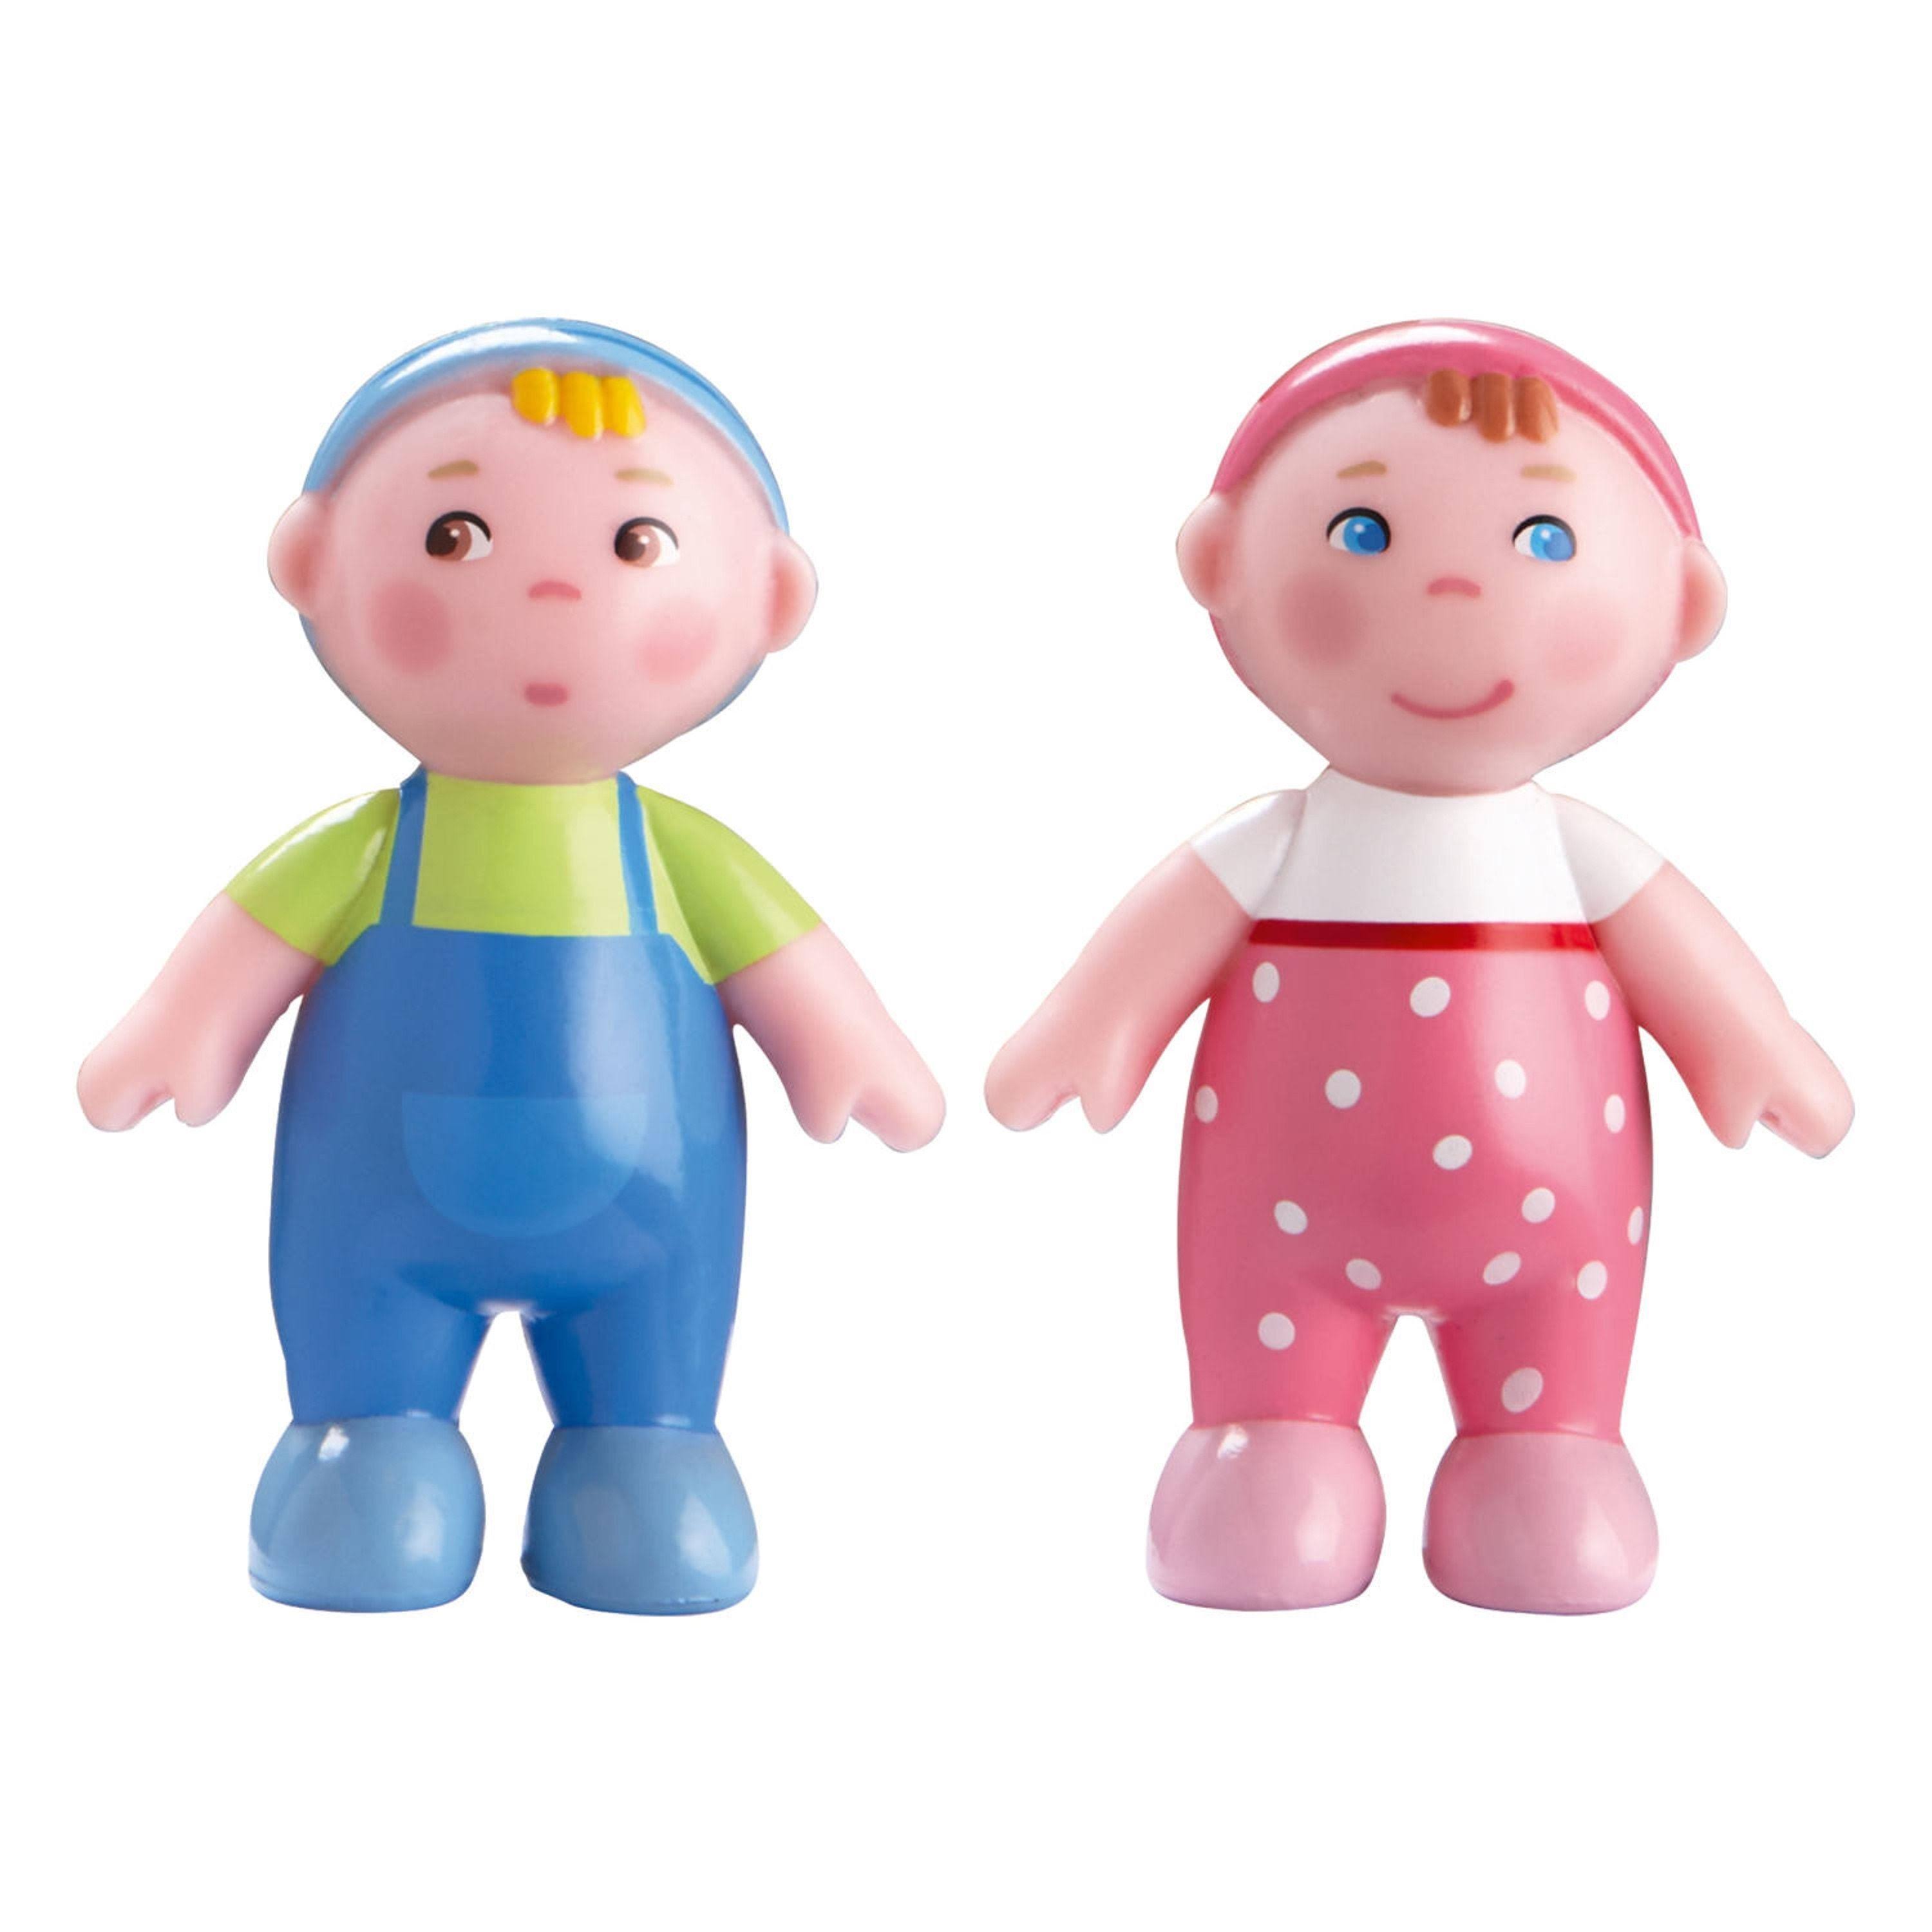 Haba Little Friends Babies Marie and Max Toy